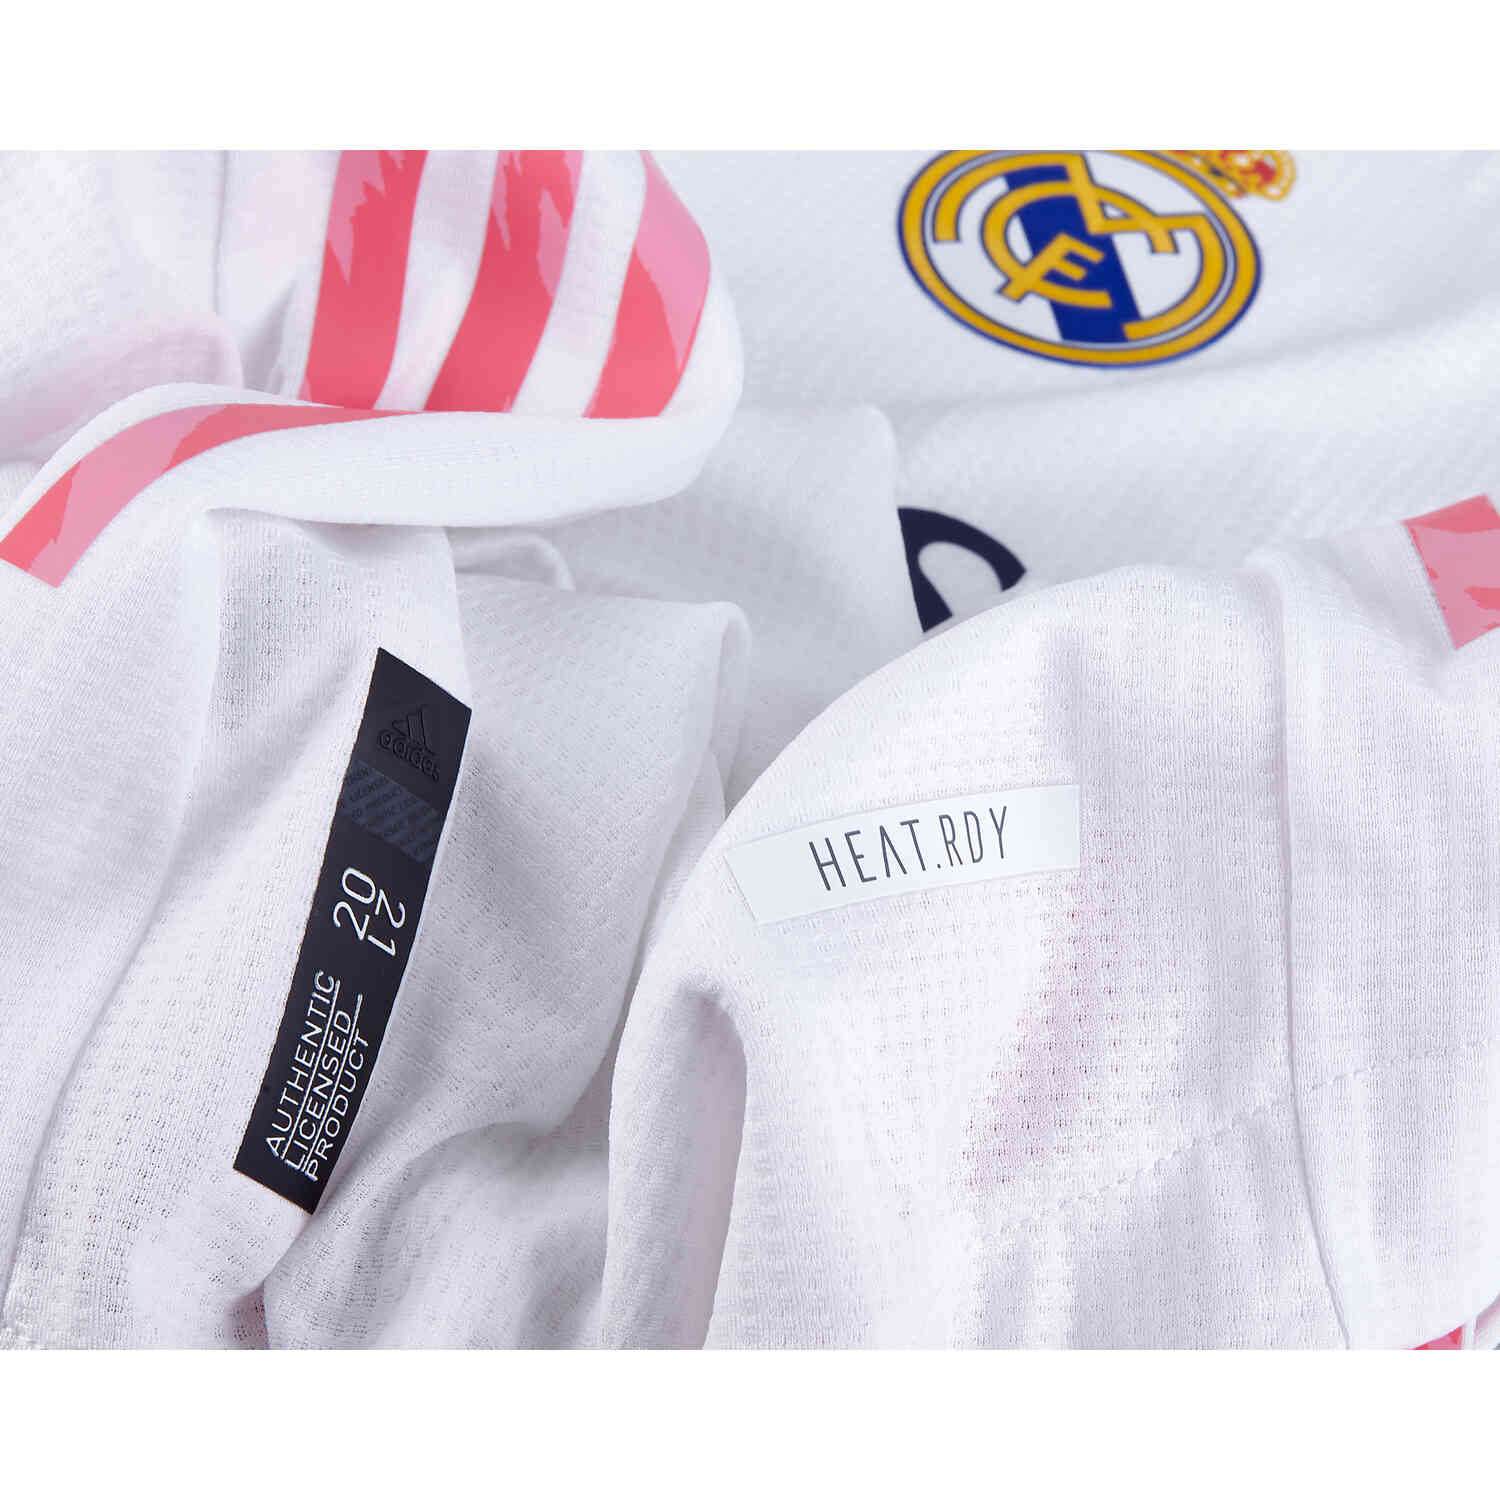 2021/22 adidas Real Madrid Home Authentic Jersey - Soccer Master